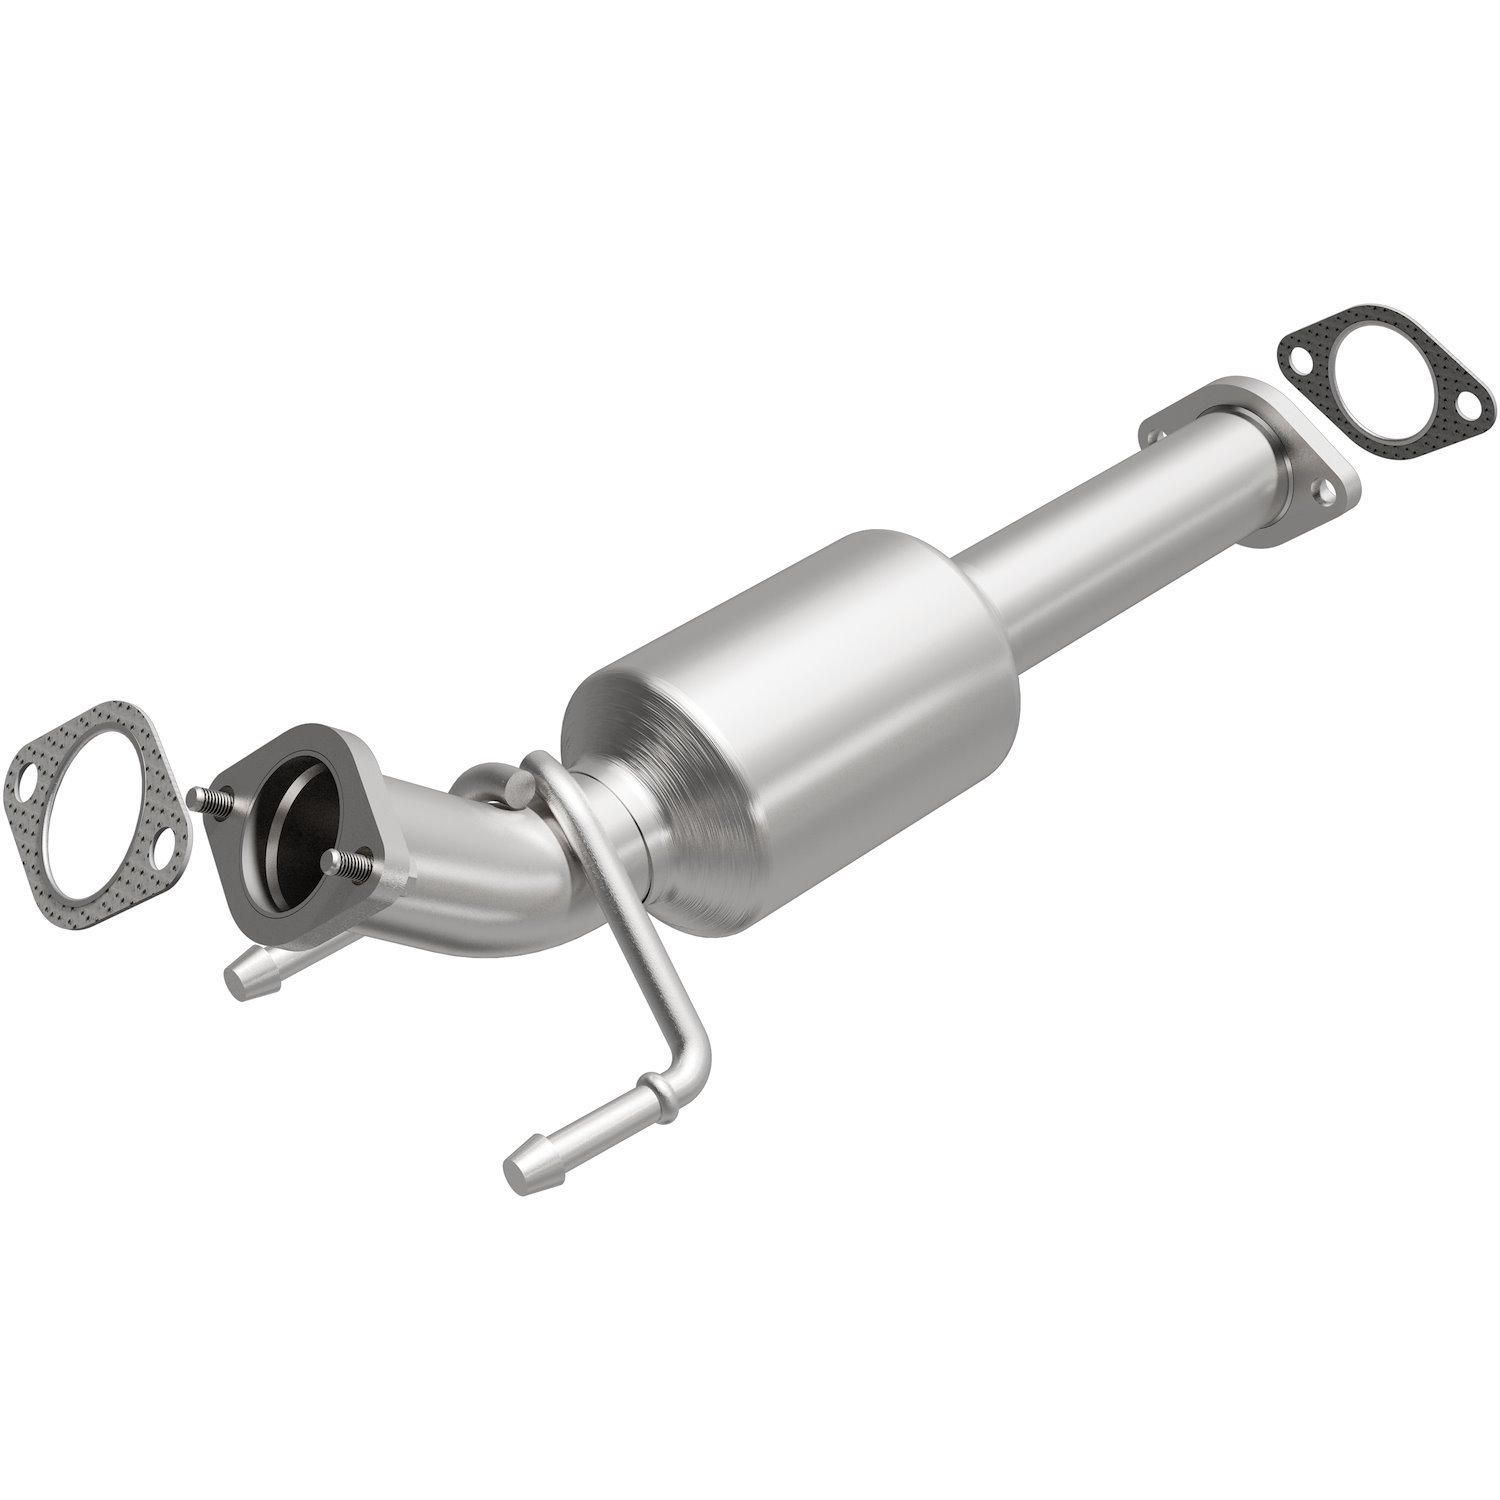 2012-2017 Chevrolet Sonic OEM Grade Federal / EPA Compliant Direct-Fit Catalytic Converter